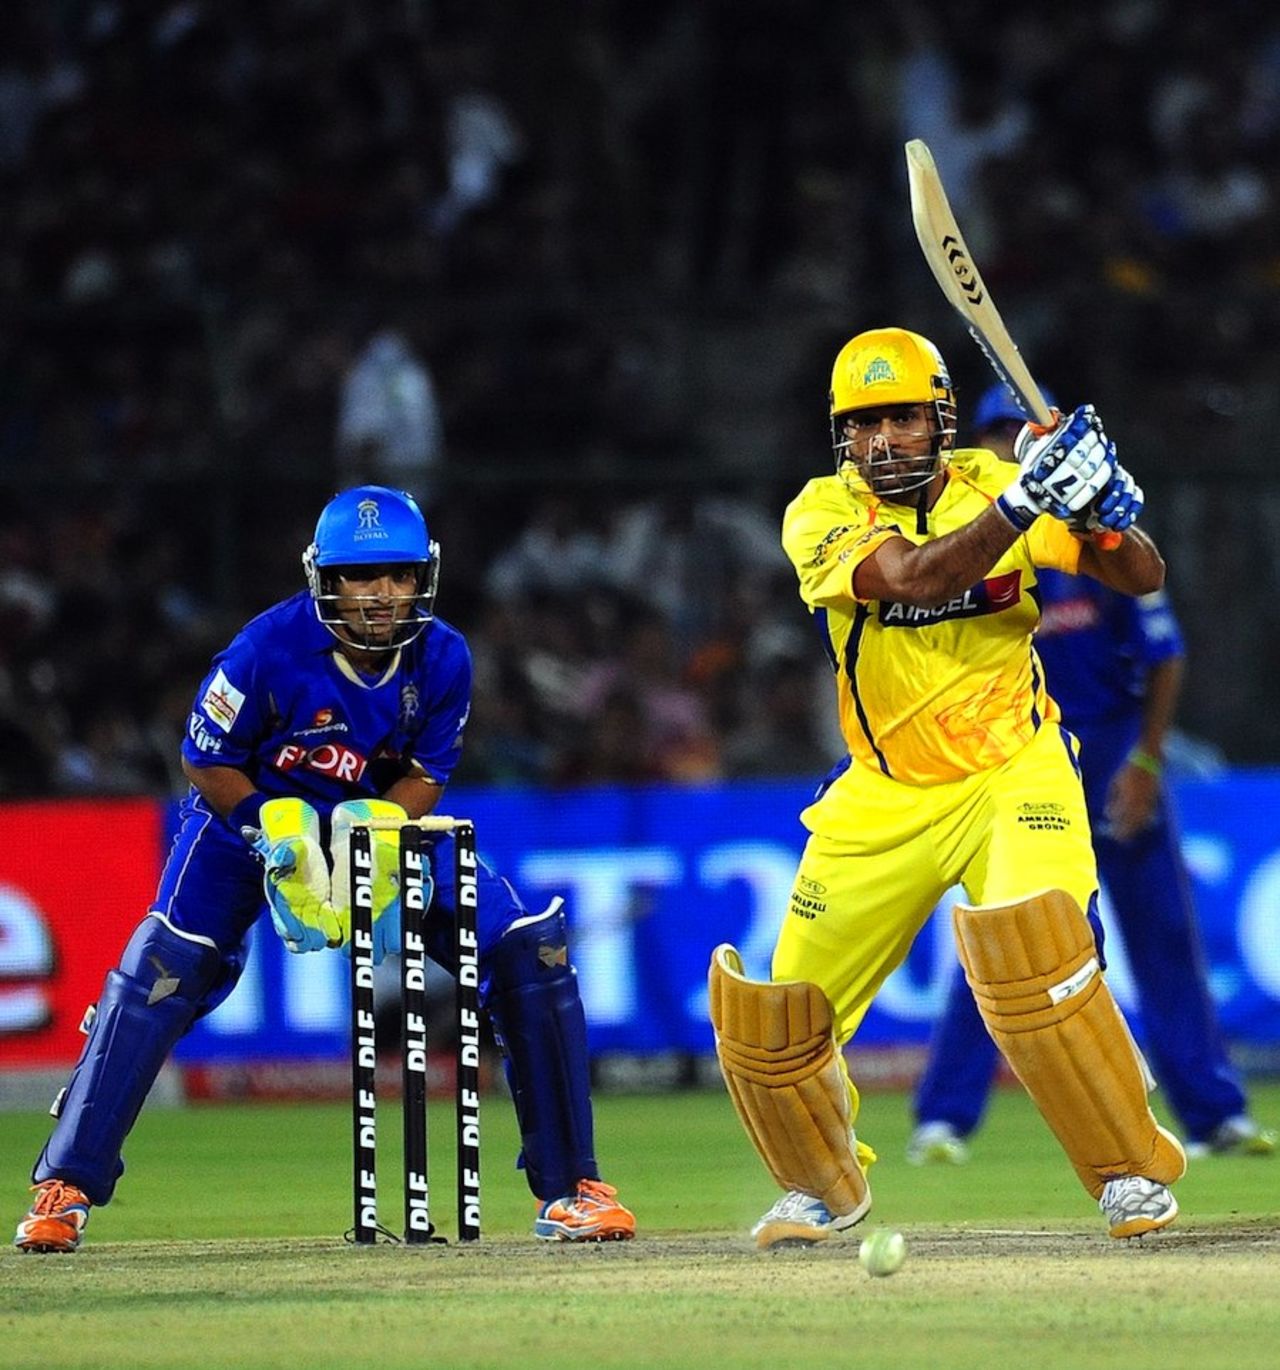 MS Dhoni forces the ball through the off side, Rajasthan v Chennai, IPL 2011, Jaipur, May 9, 2011